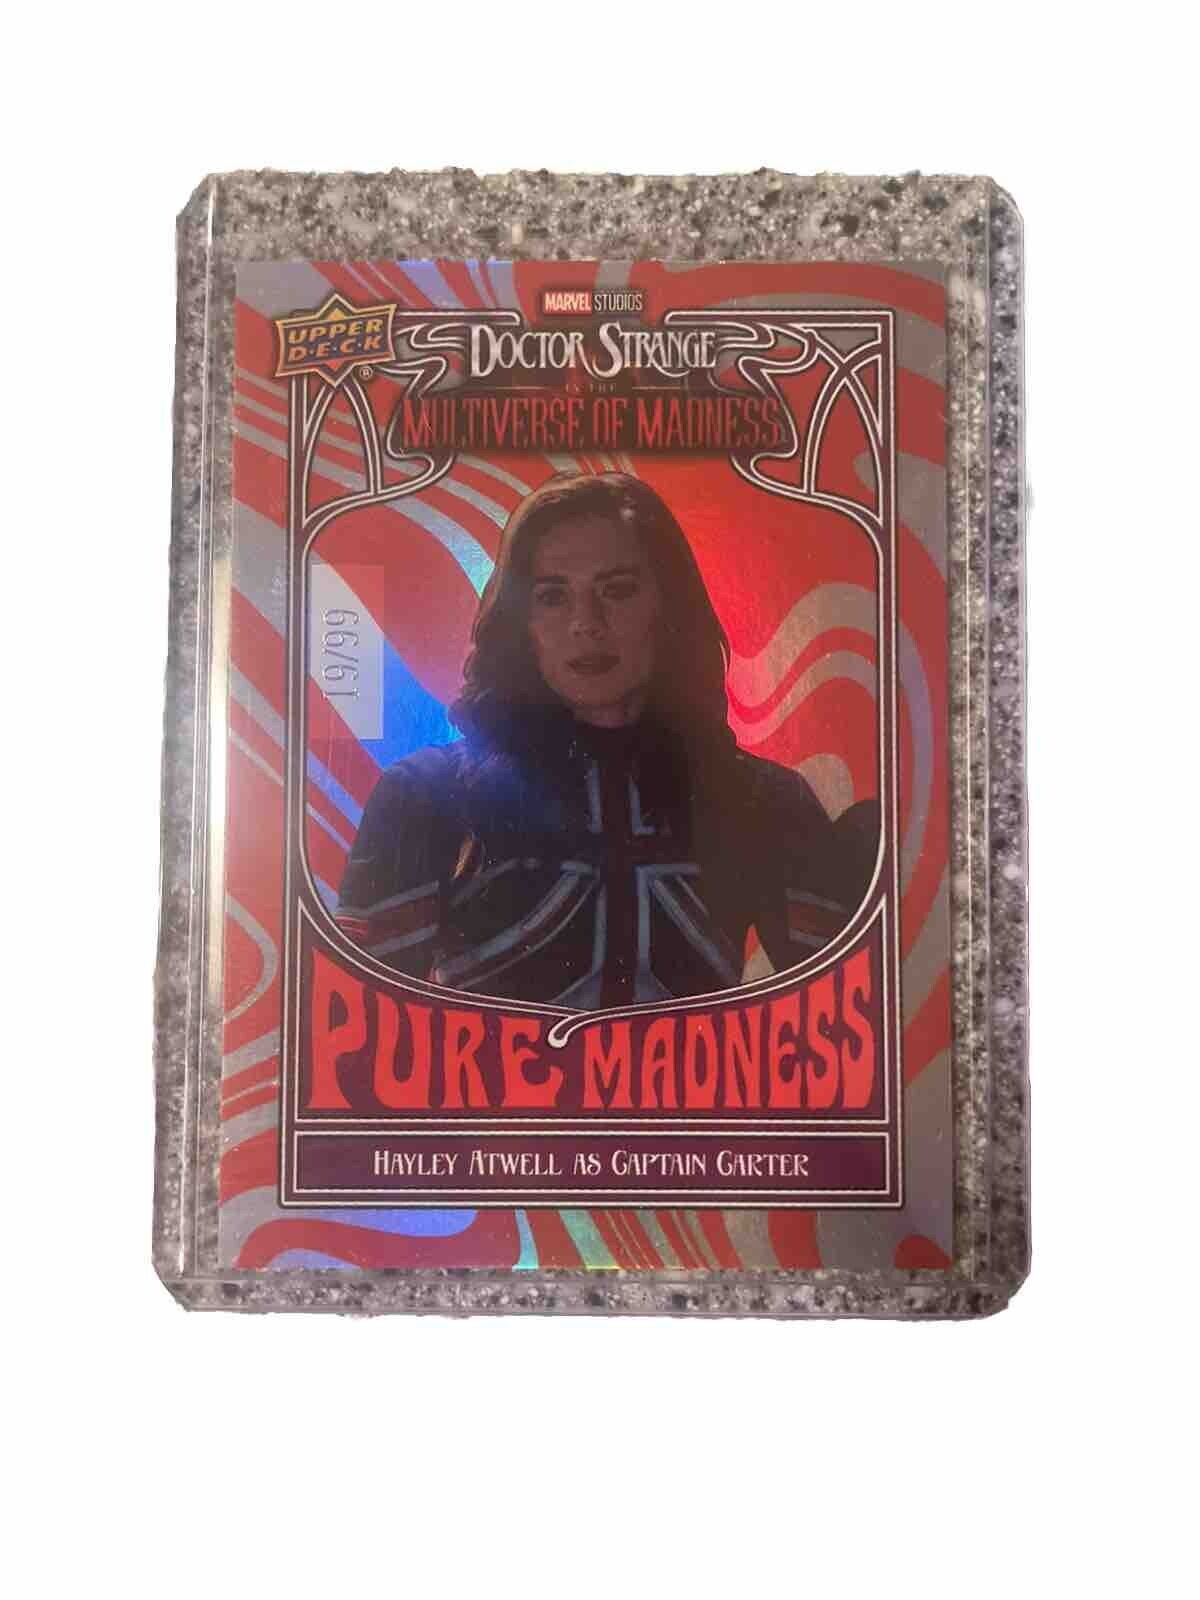 2023 Marvel Dr Strange Multiverse of Madness Captain Carter /99 PURE MADNESS